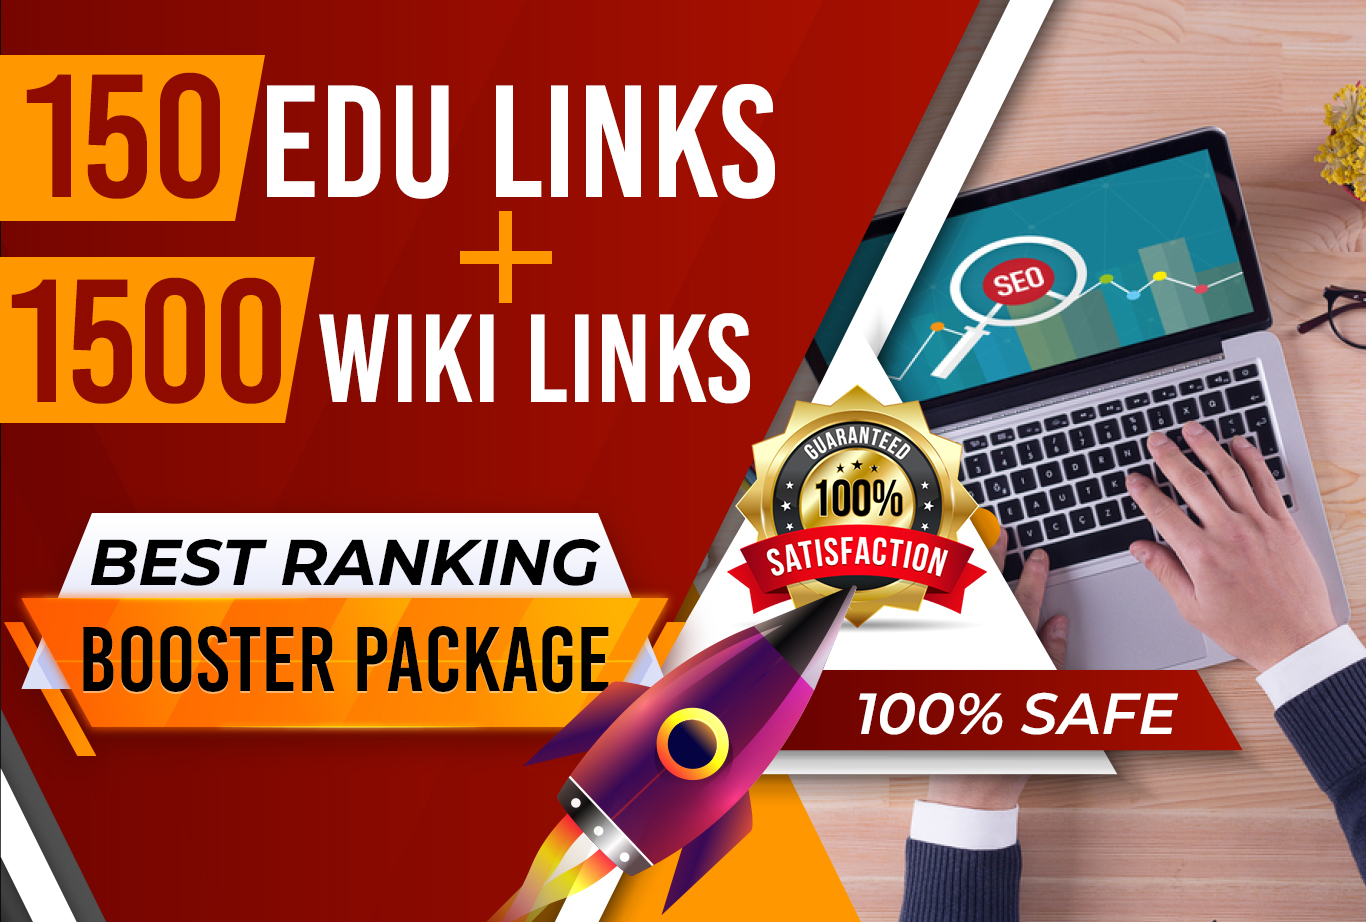 Best/trusted 150 EDU + 1500 WIKI link 100% Safe ranking package